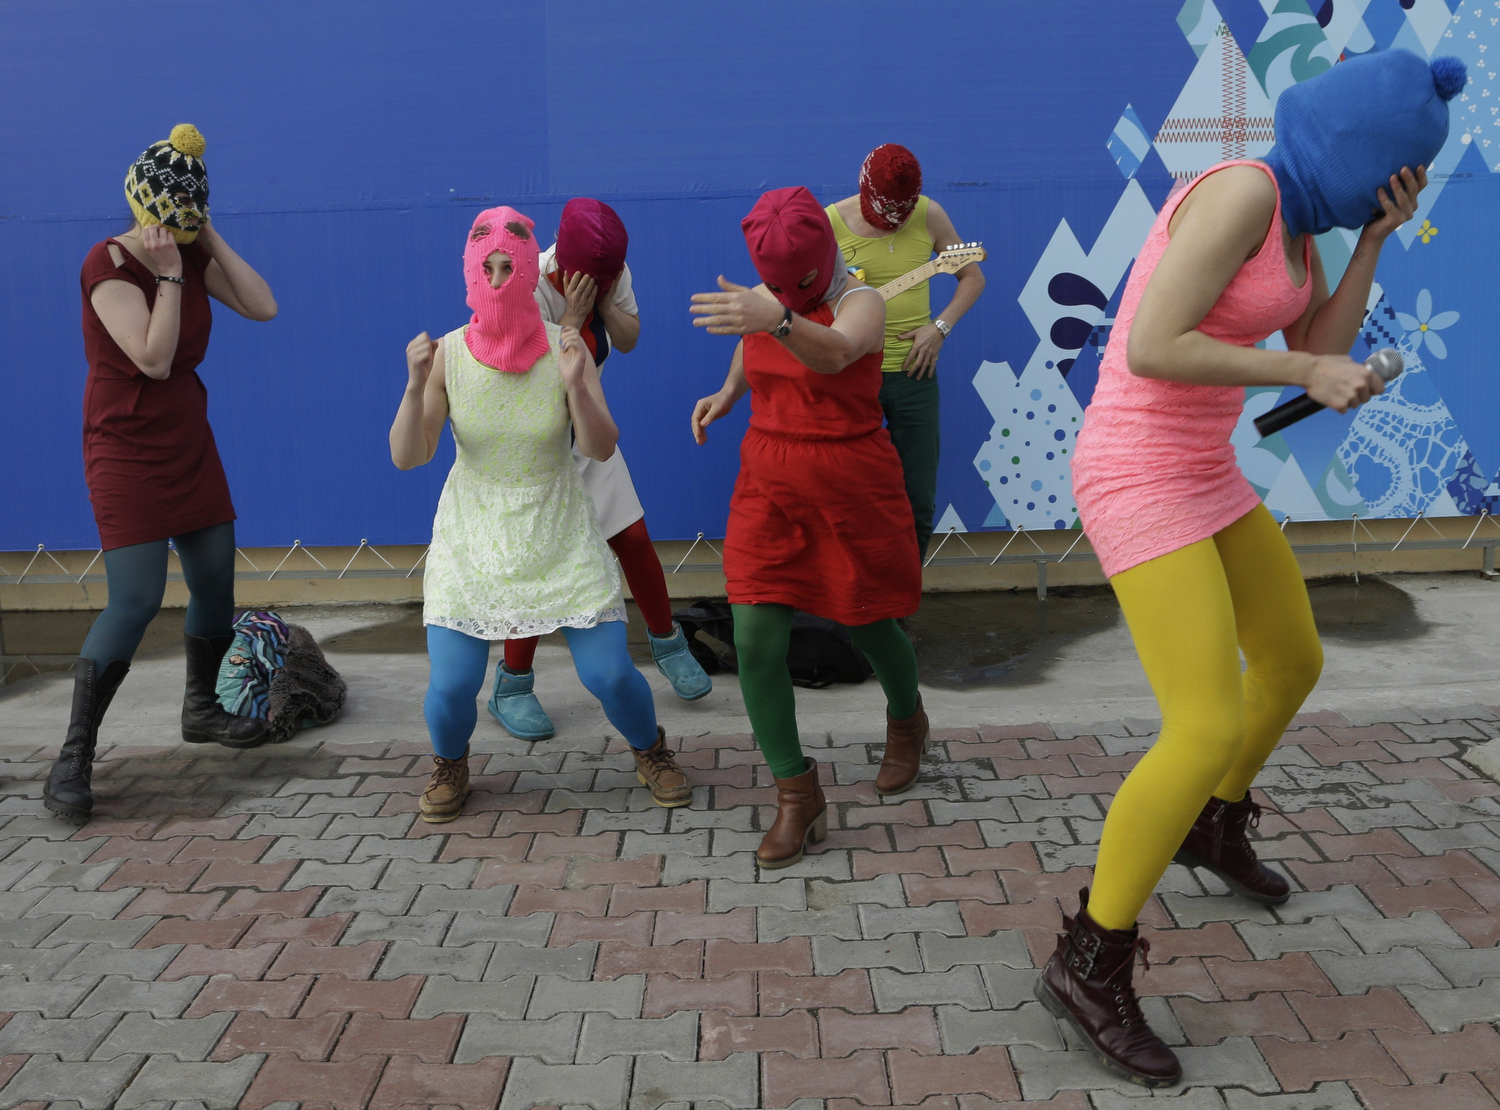 Nadezhda Tolokonnikova covers her face to protect herself from a Cossack militiaman while she and fellow members of the punk group Pussy Riot, including Maria Alekhina, second left, in the pink balaclava, stage a protest performance in Sochi, Russia, on Wednesday, Feb. 19, 2014.